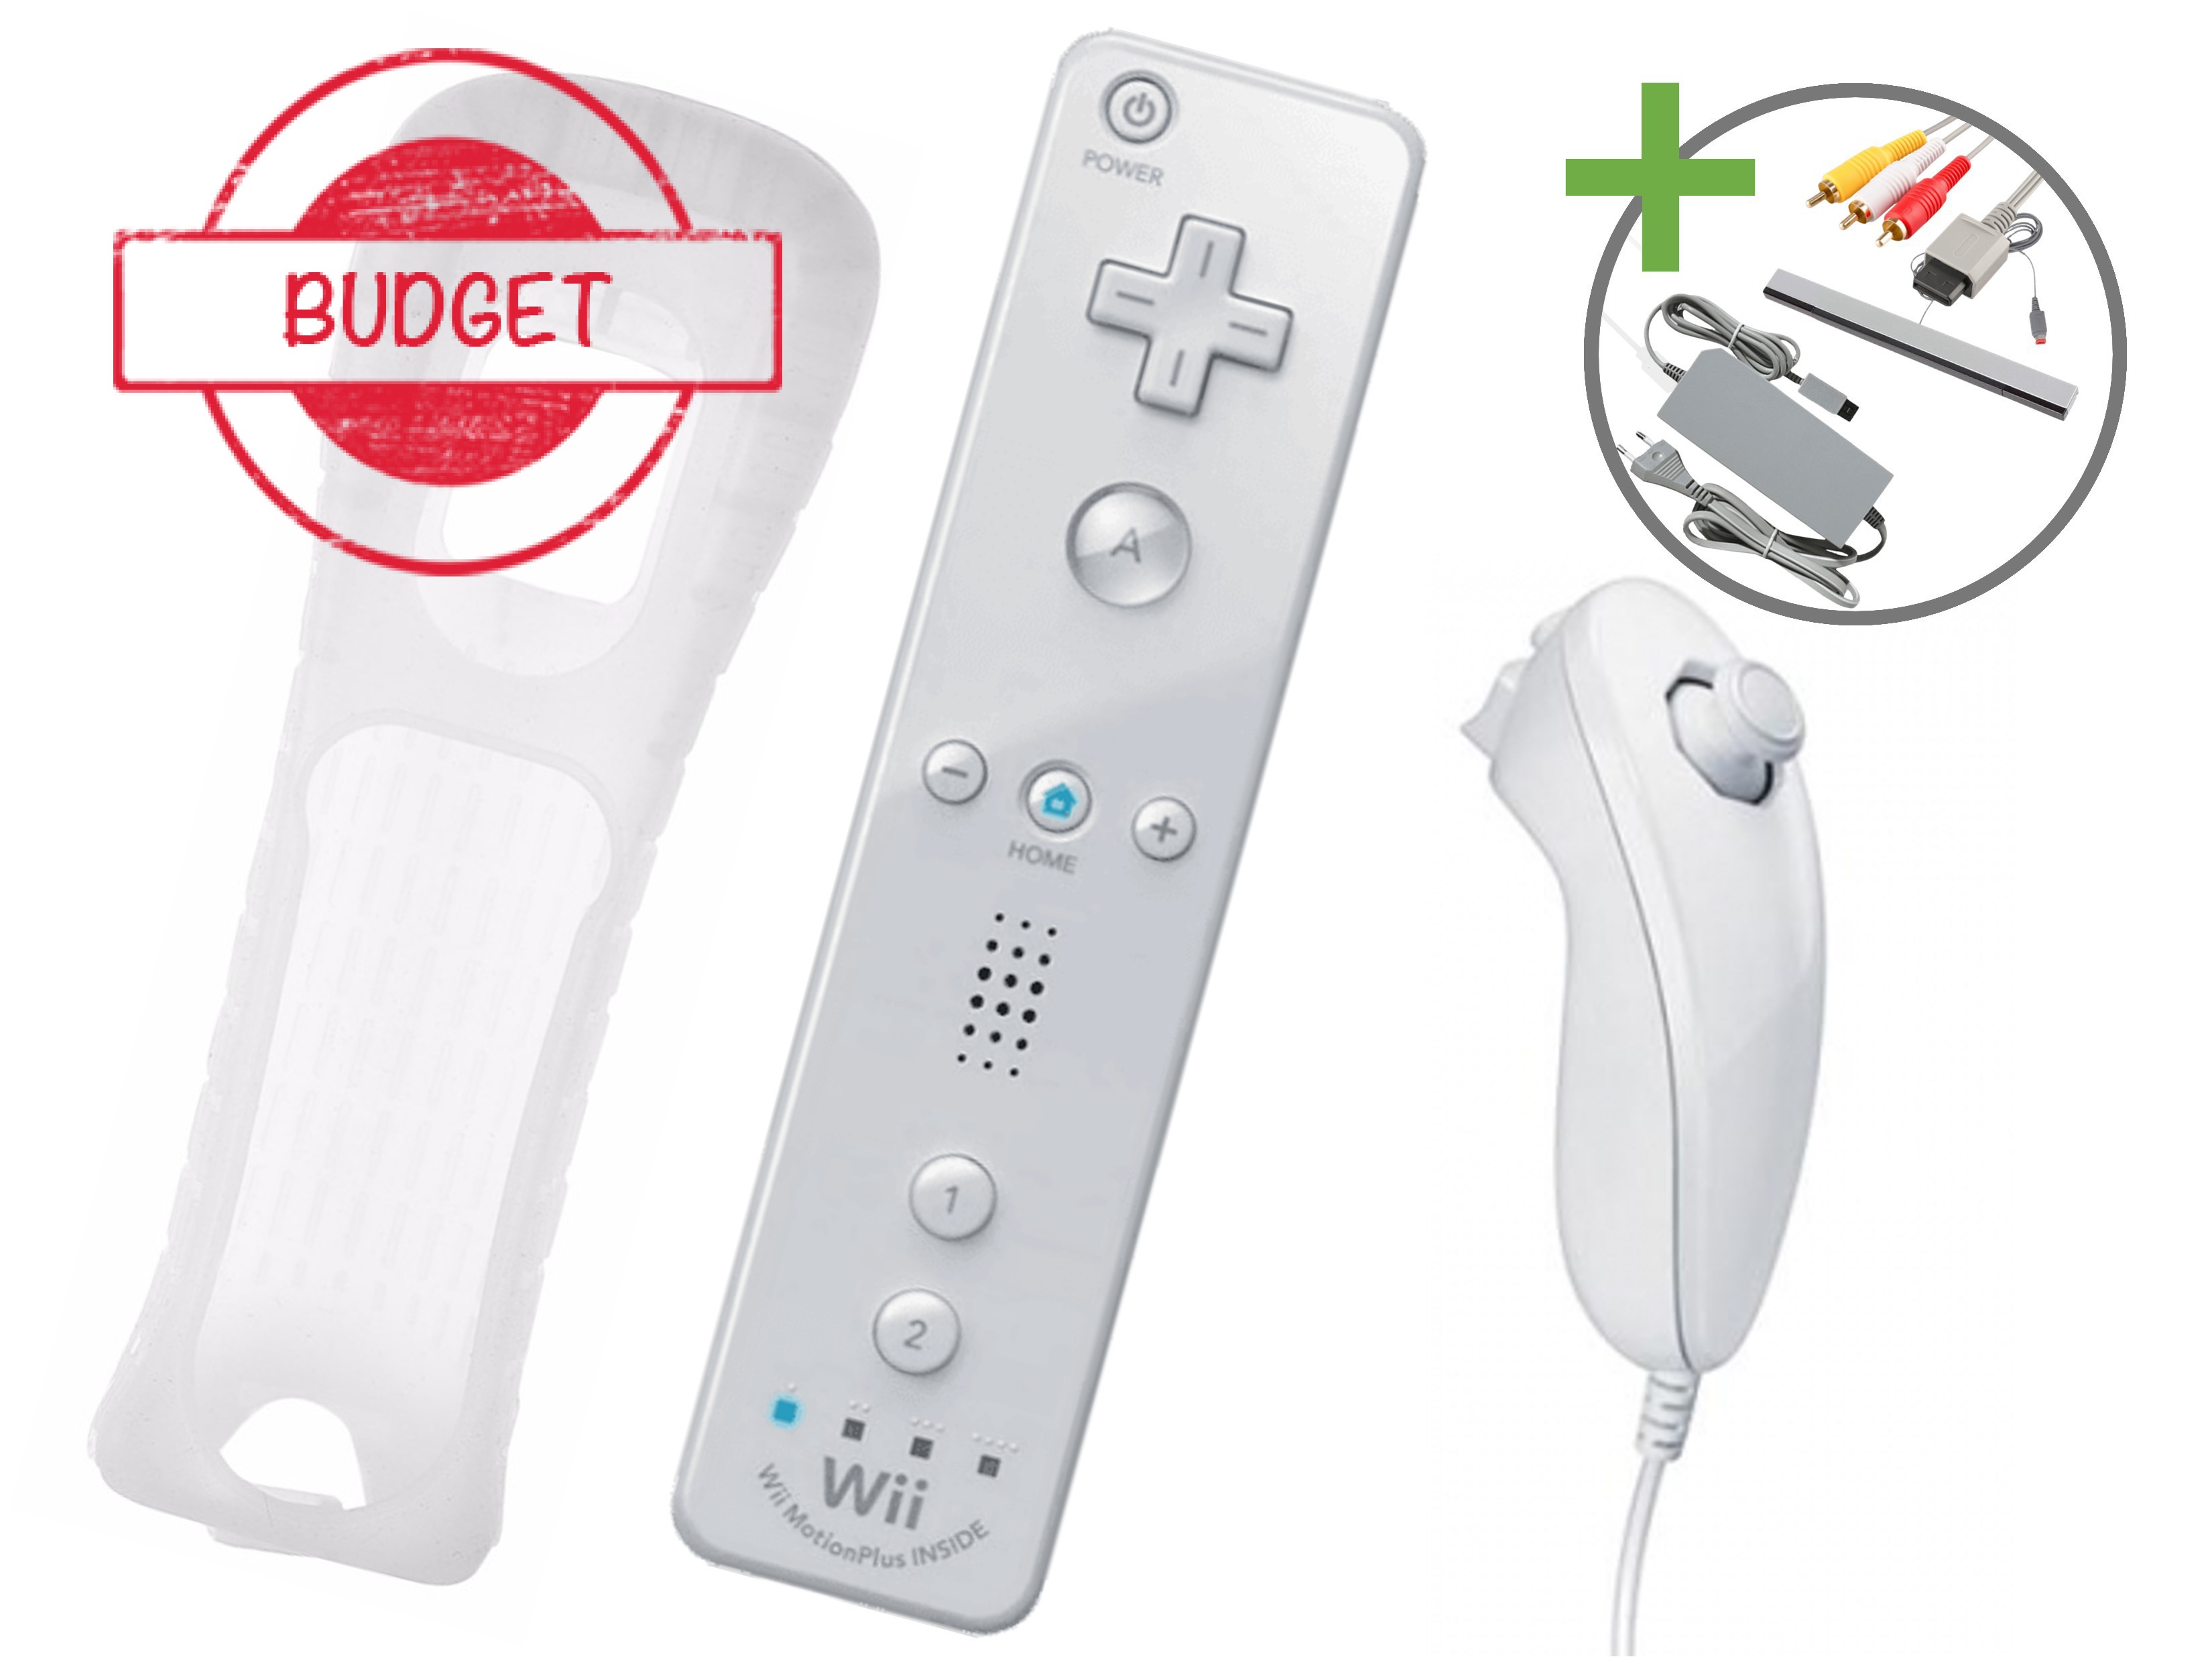 Nintendo Wii Starter Pack - Wii Family Edition - Budget - Wii Hardware - 3